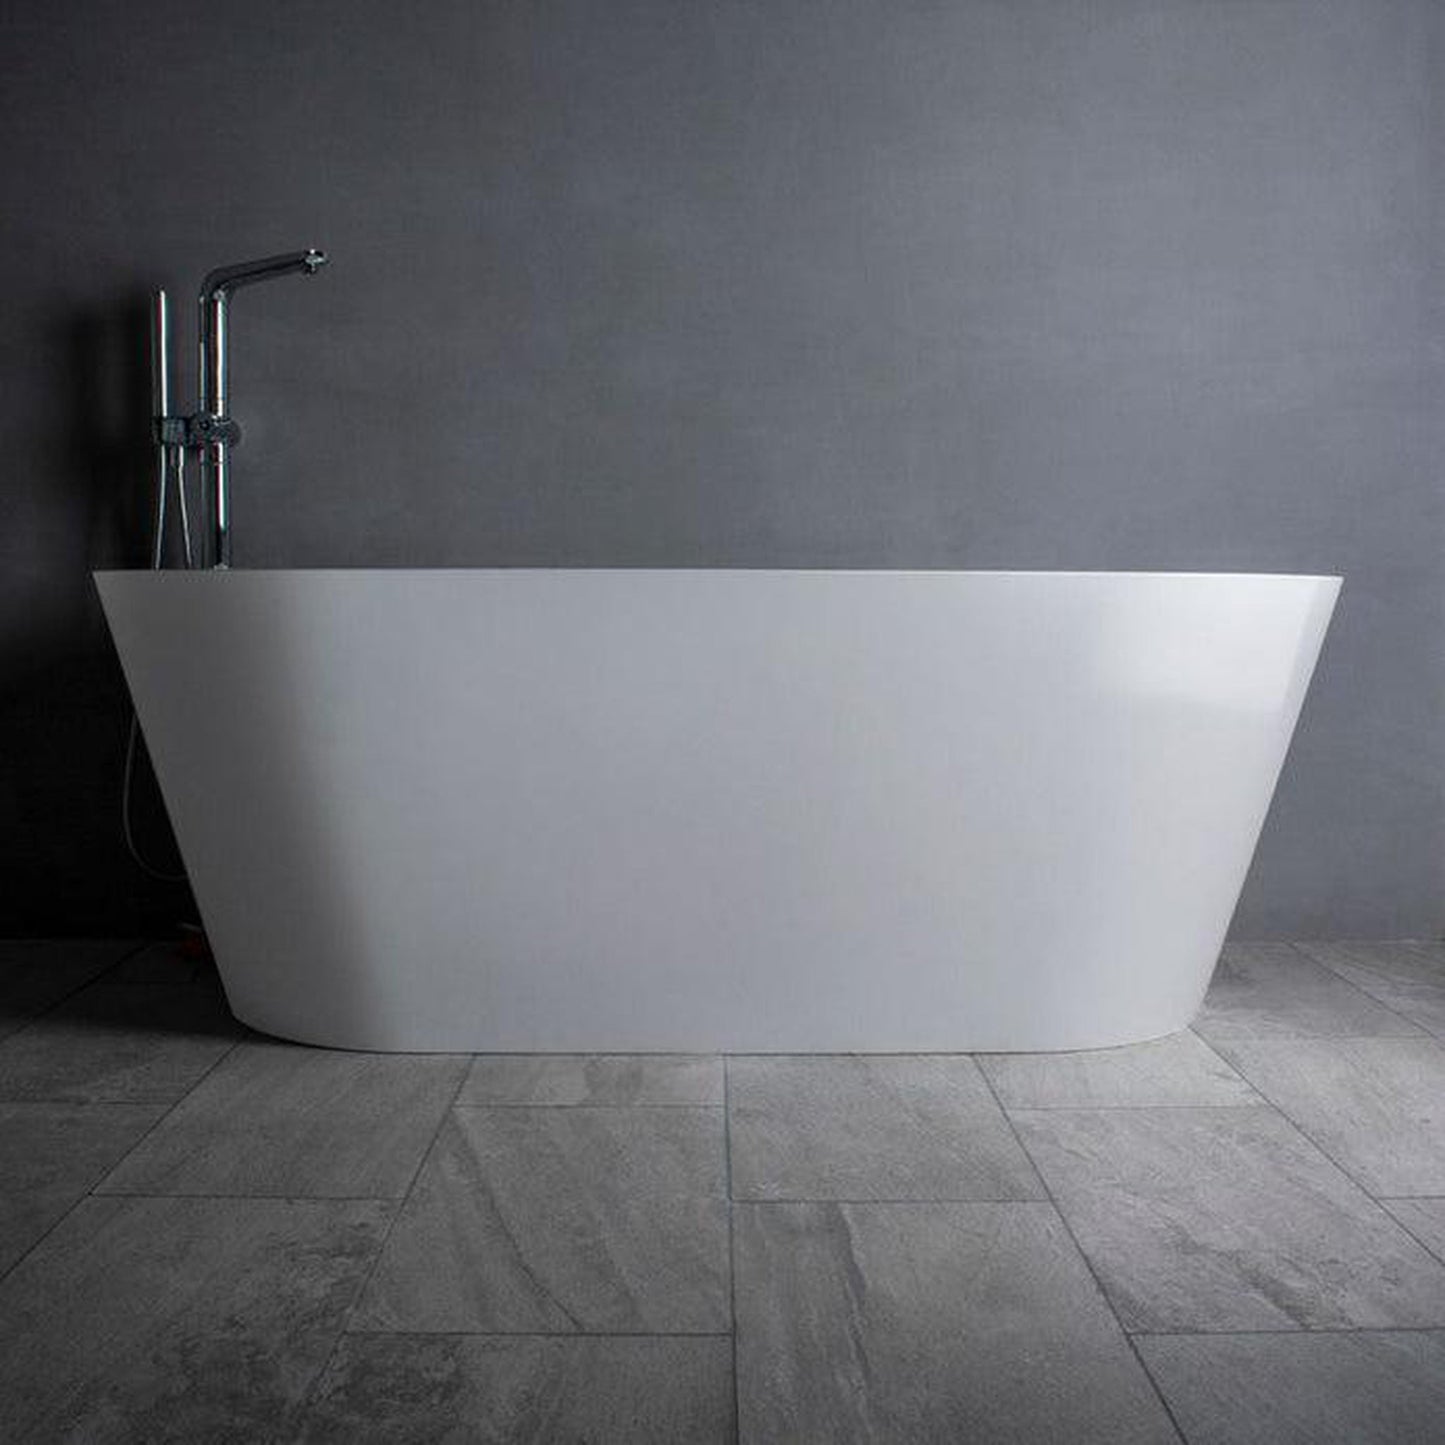 Vanity Art 65" Matte White Solid Surface Resin Stone Freestanding Bathtub With Overflow and Pop-up Drain